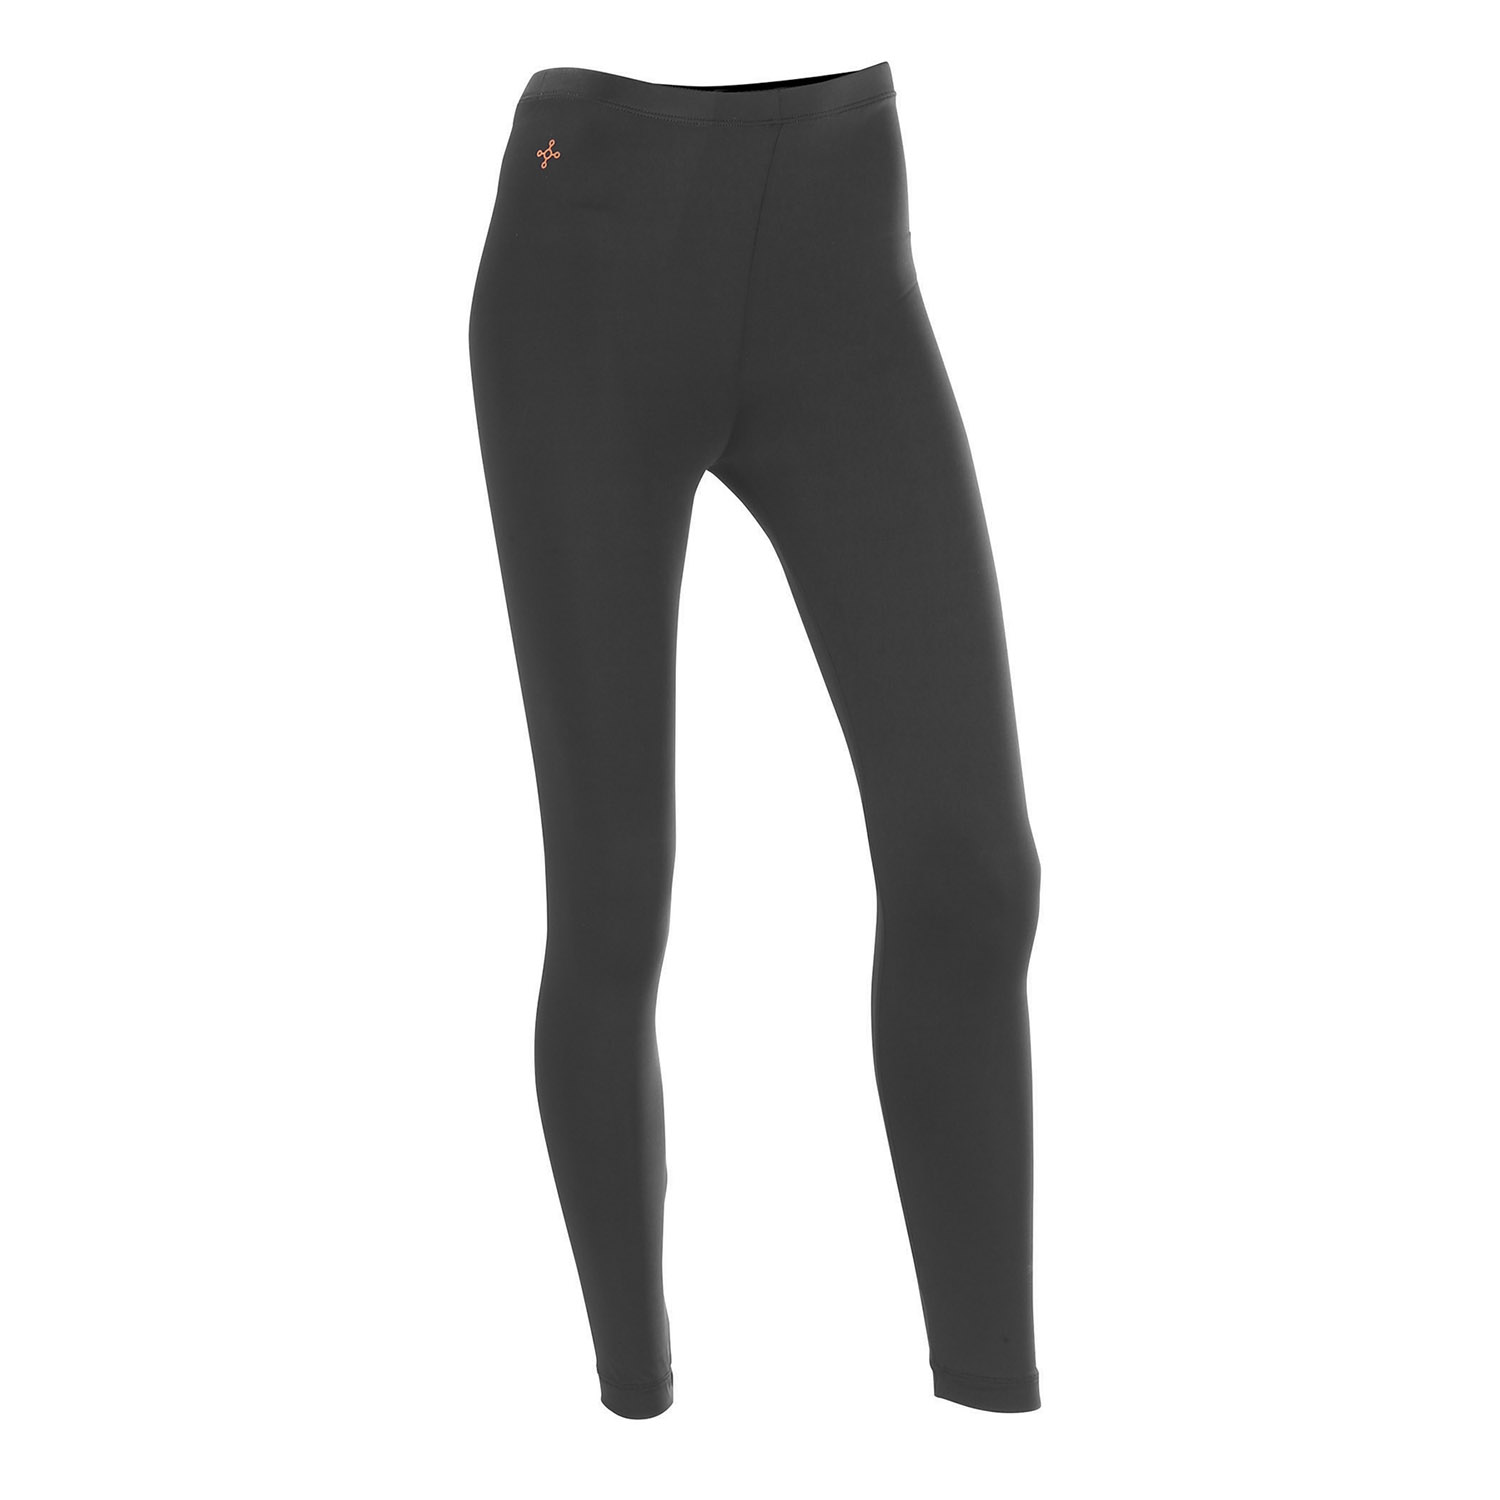 Tommie Copper Women's Rise Above Recovery Compression Tights.